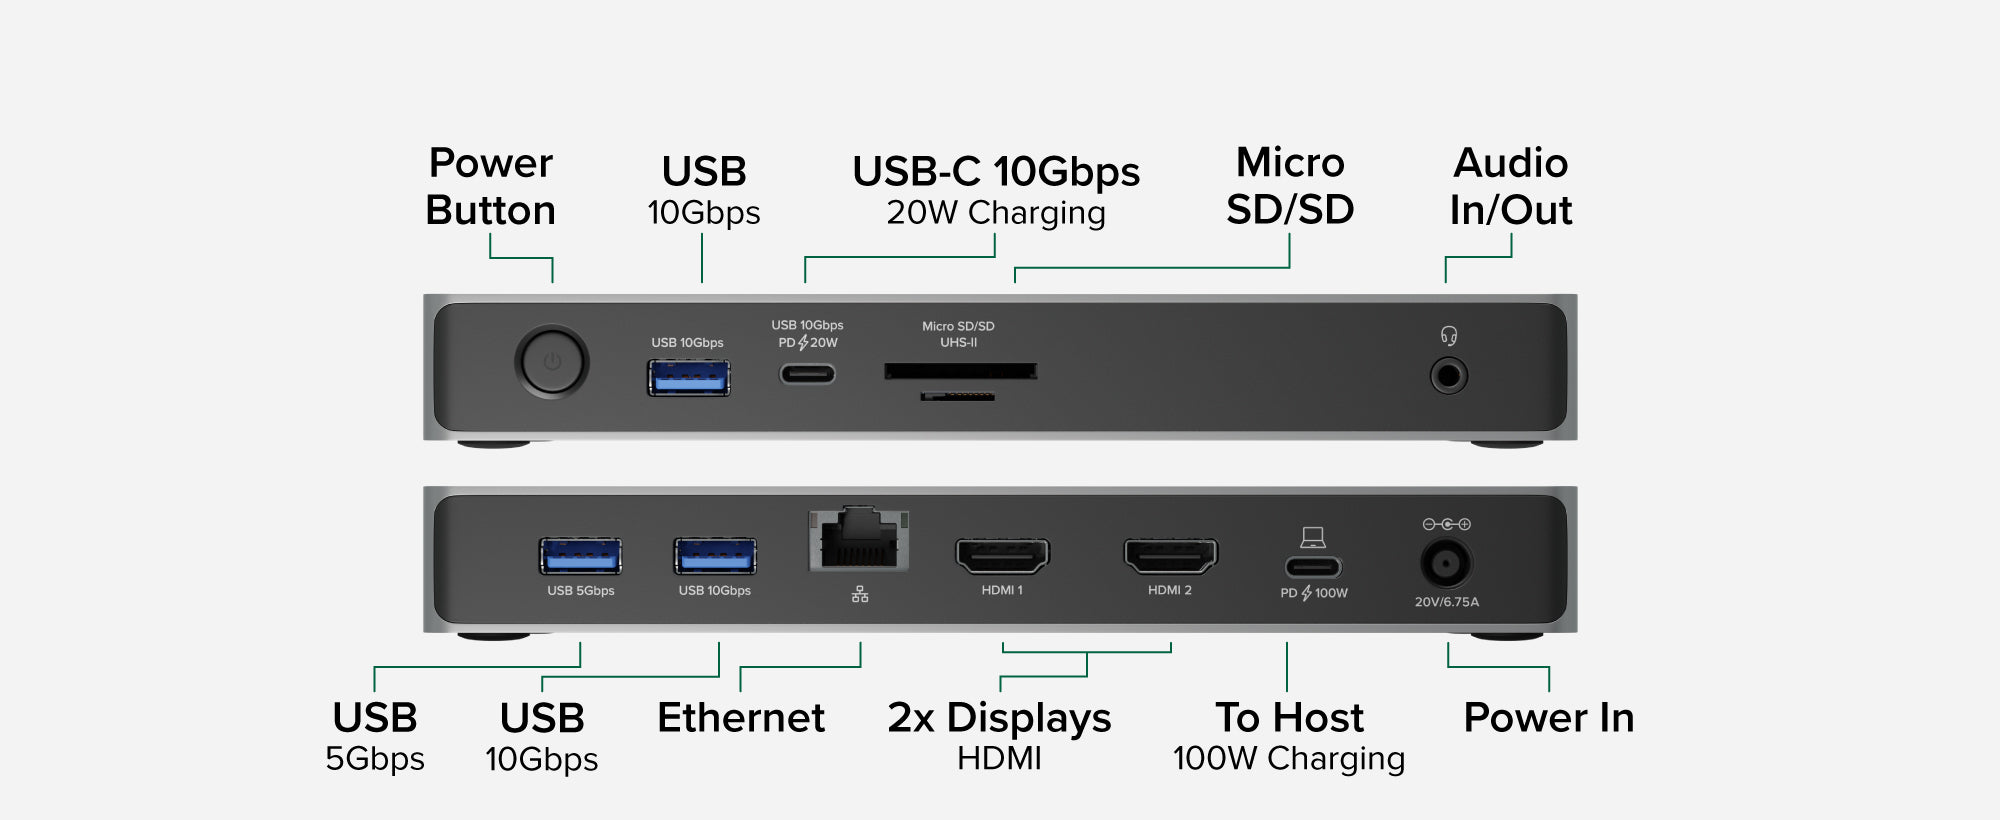 Overview of all the ports and features on the UD-4VPD